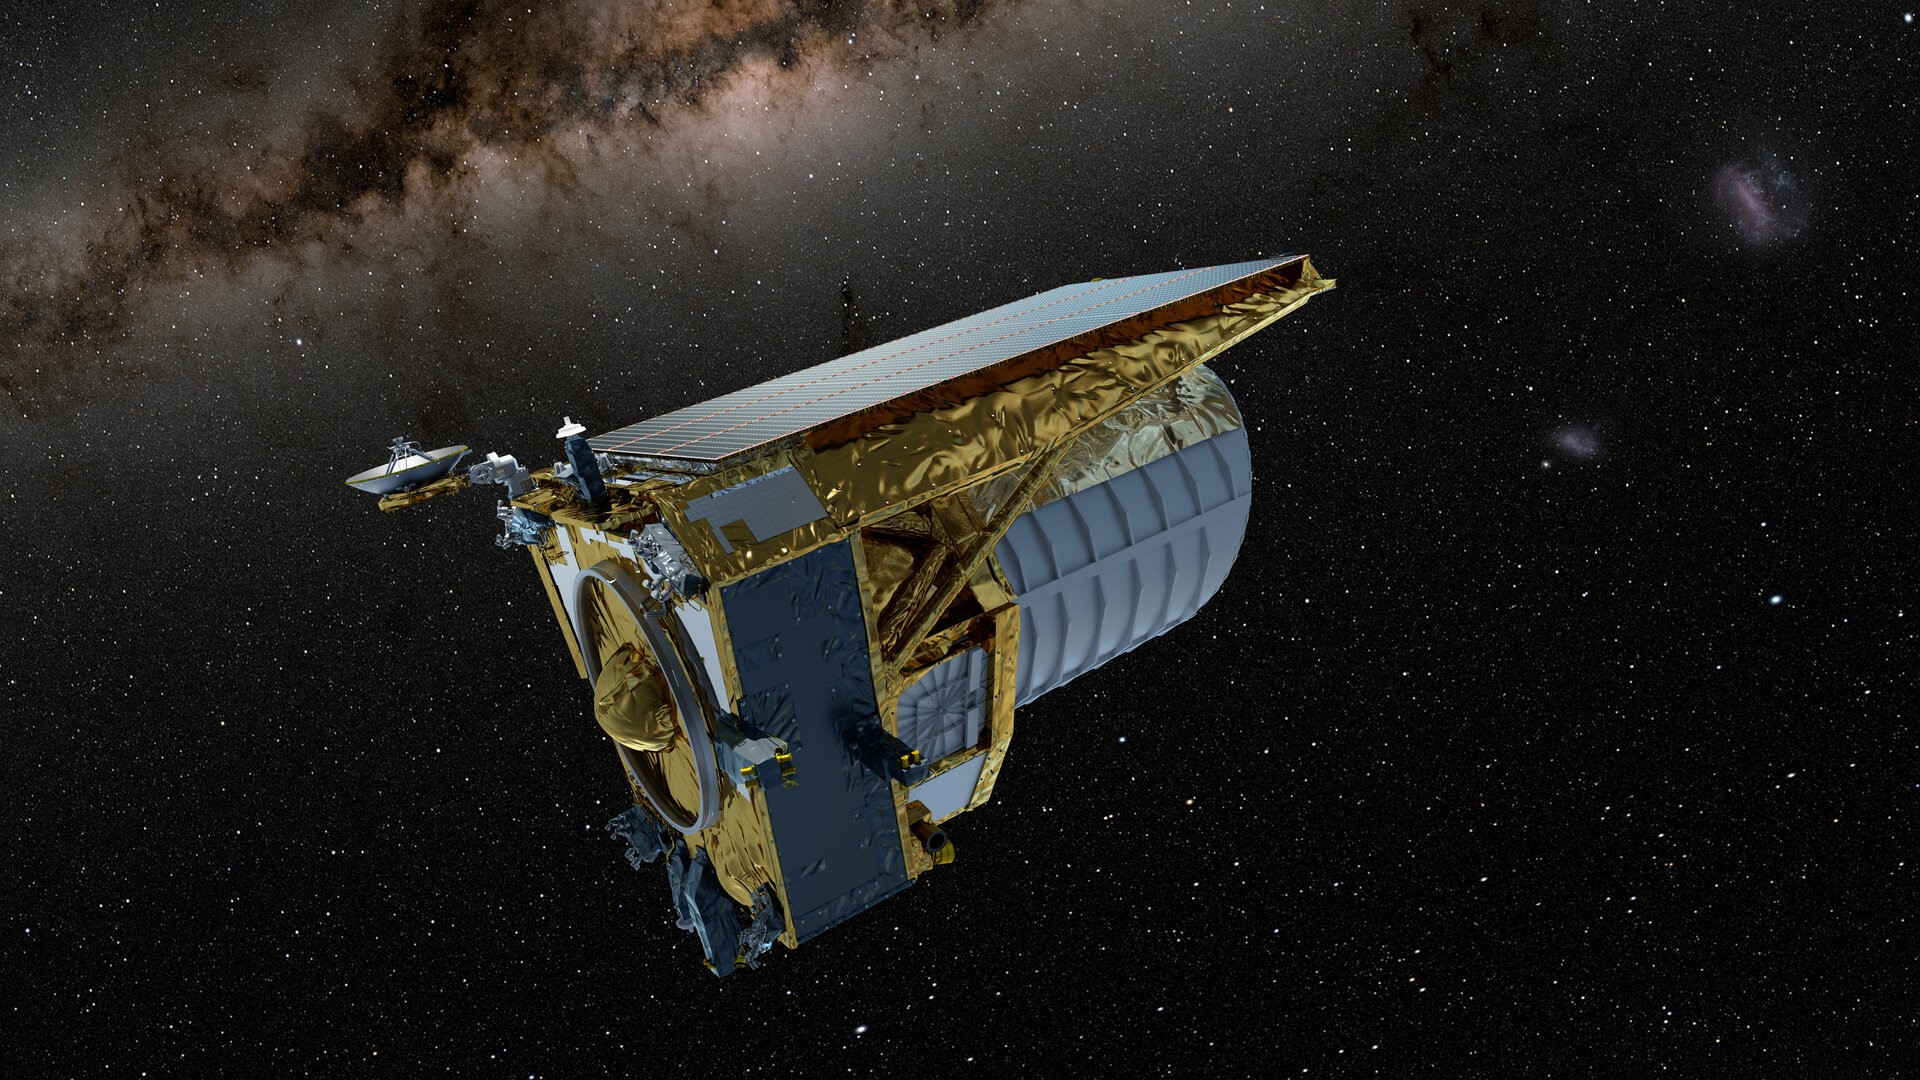 Dark matter-hunting Euclid mission to share its 1st full-color images of the universe on Nov. 7 Space